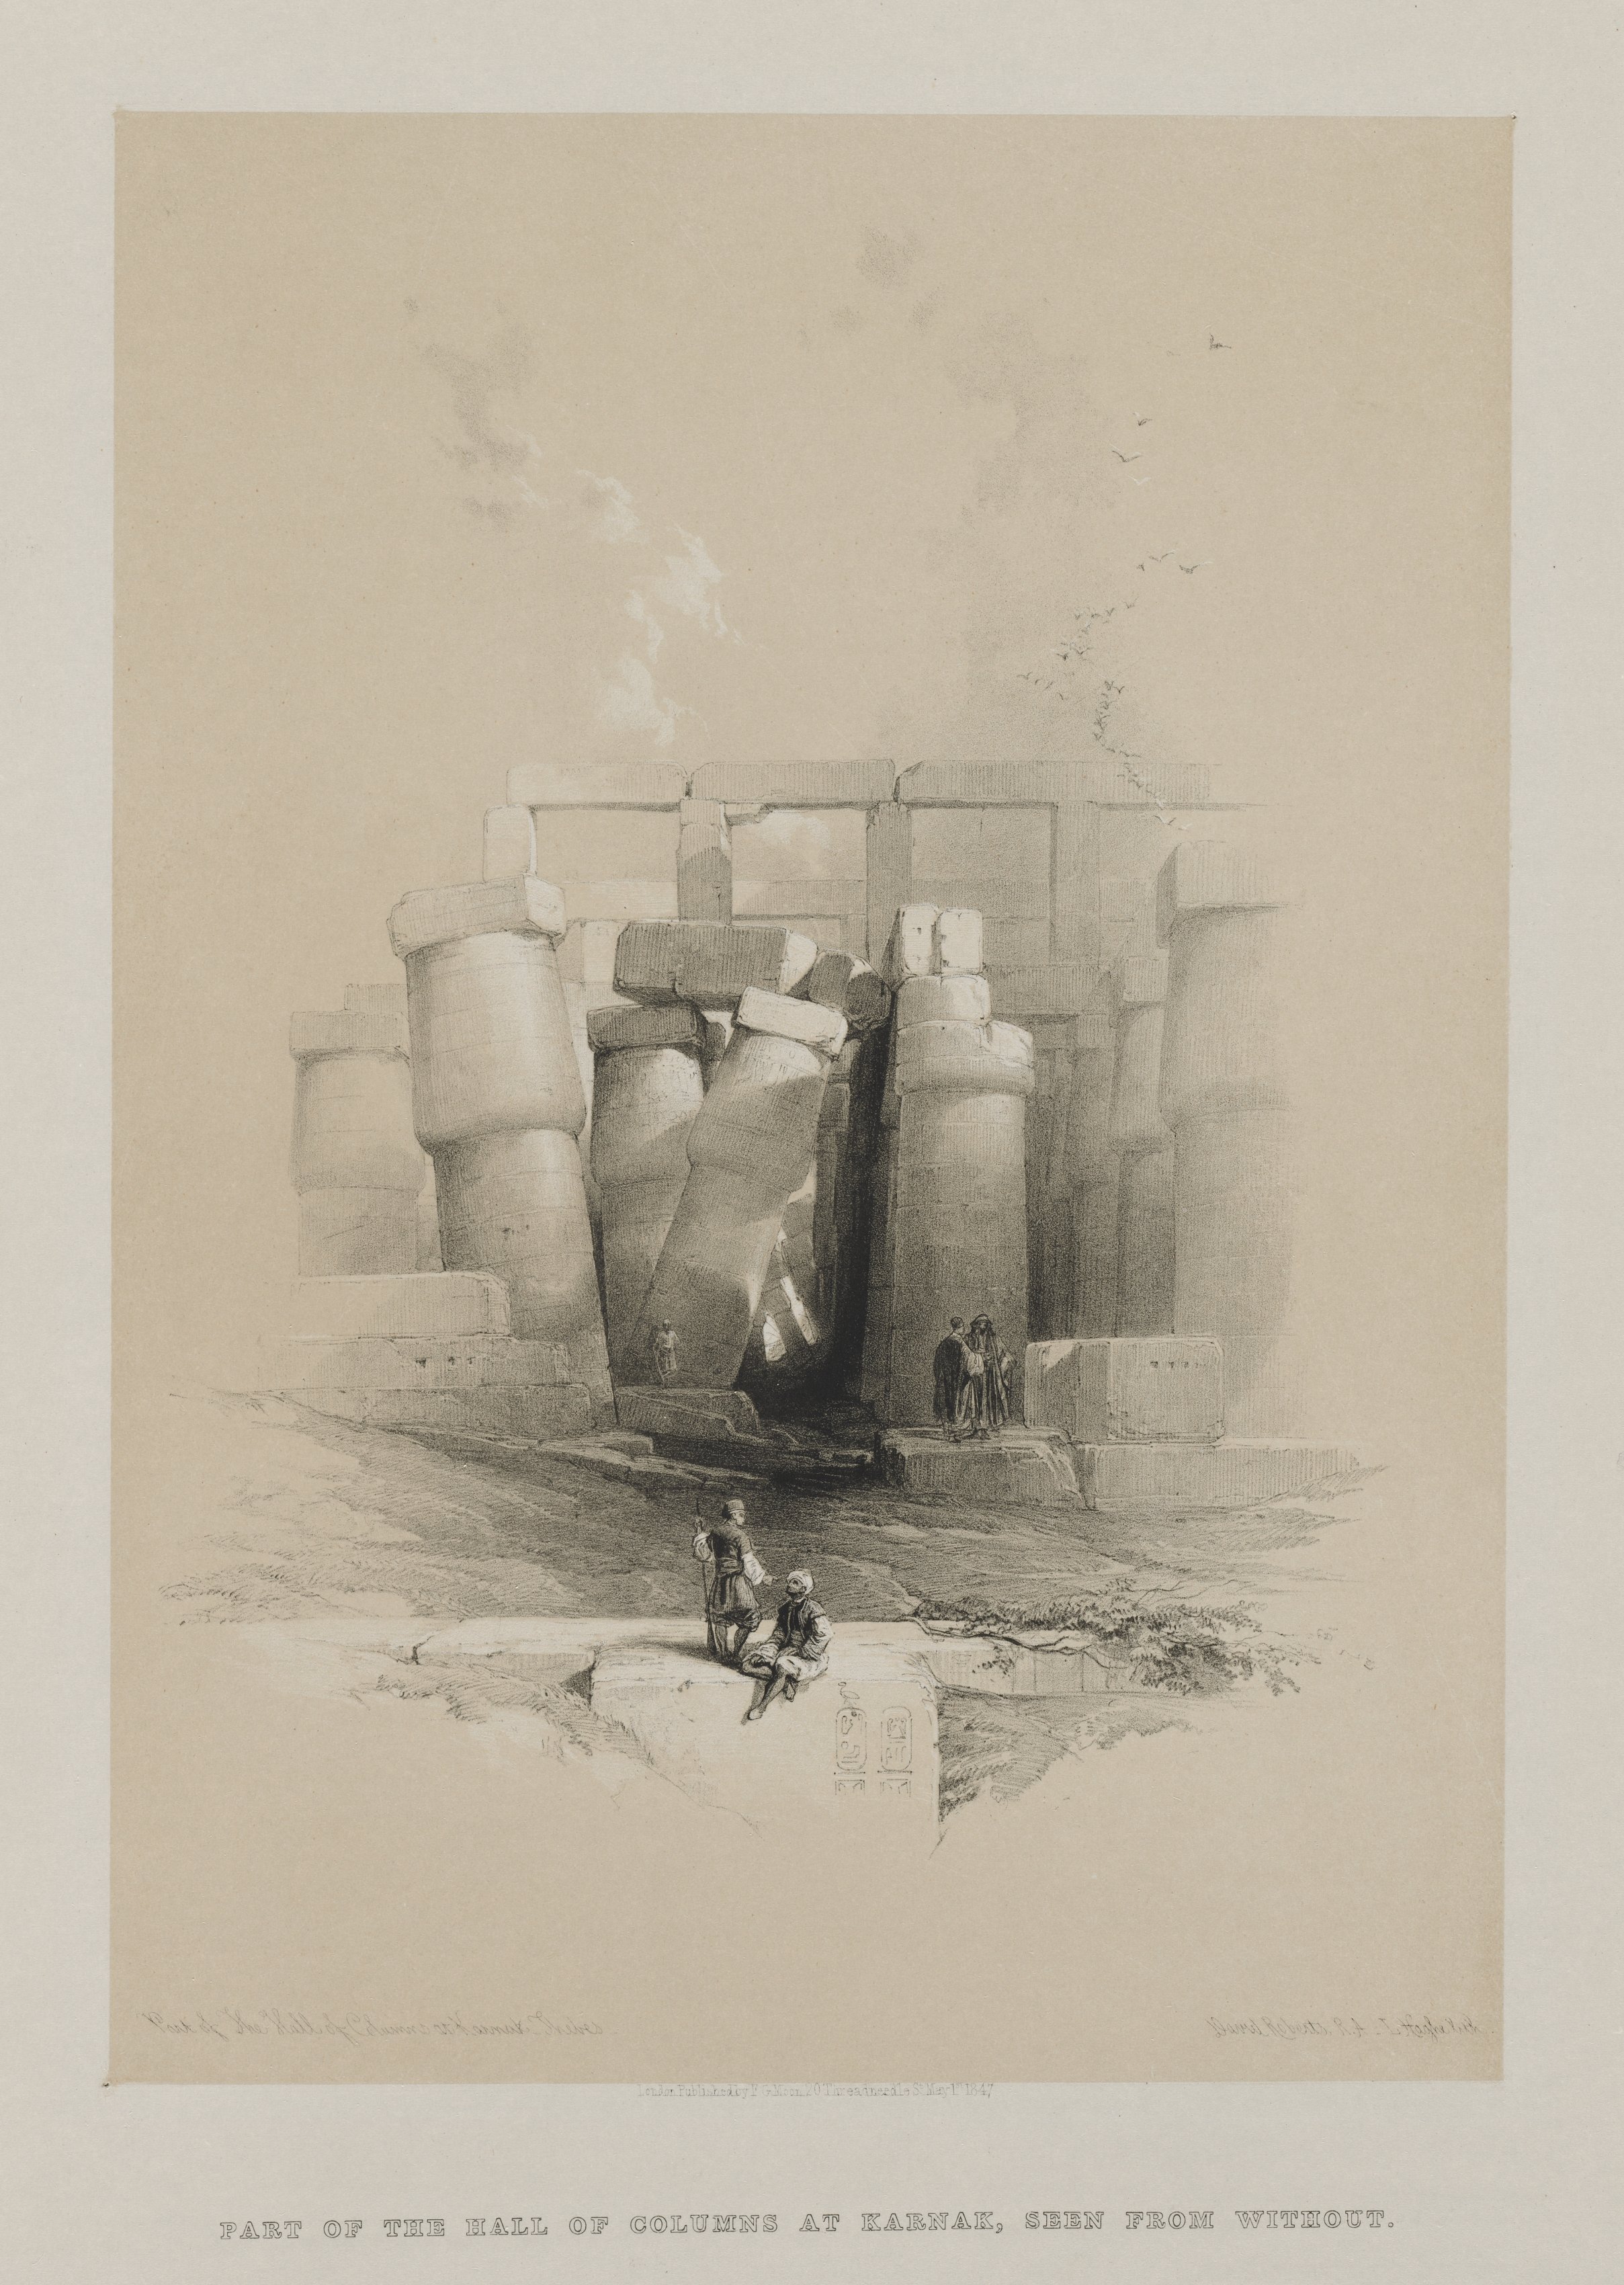 Egypt and Nubia, Volume II: Part of the Hall of Columns at Karnak, Thebes